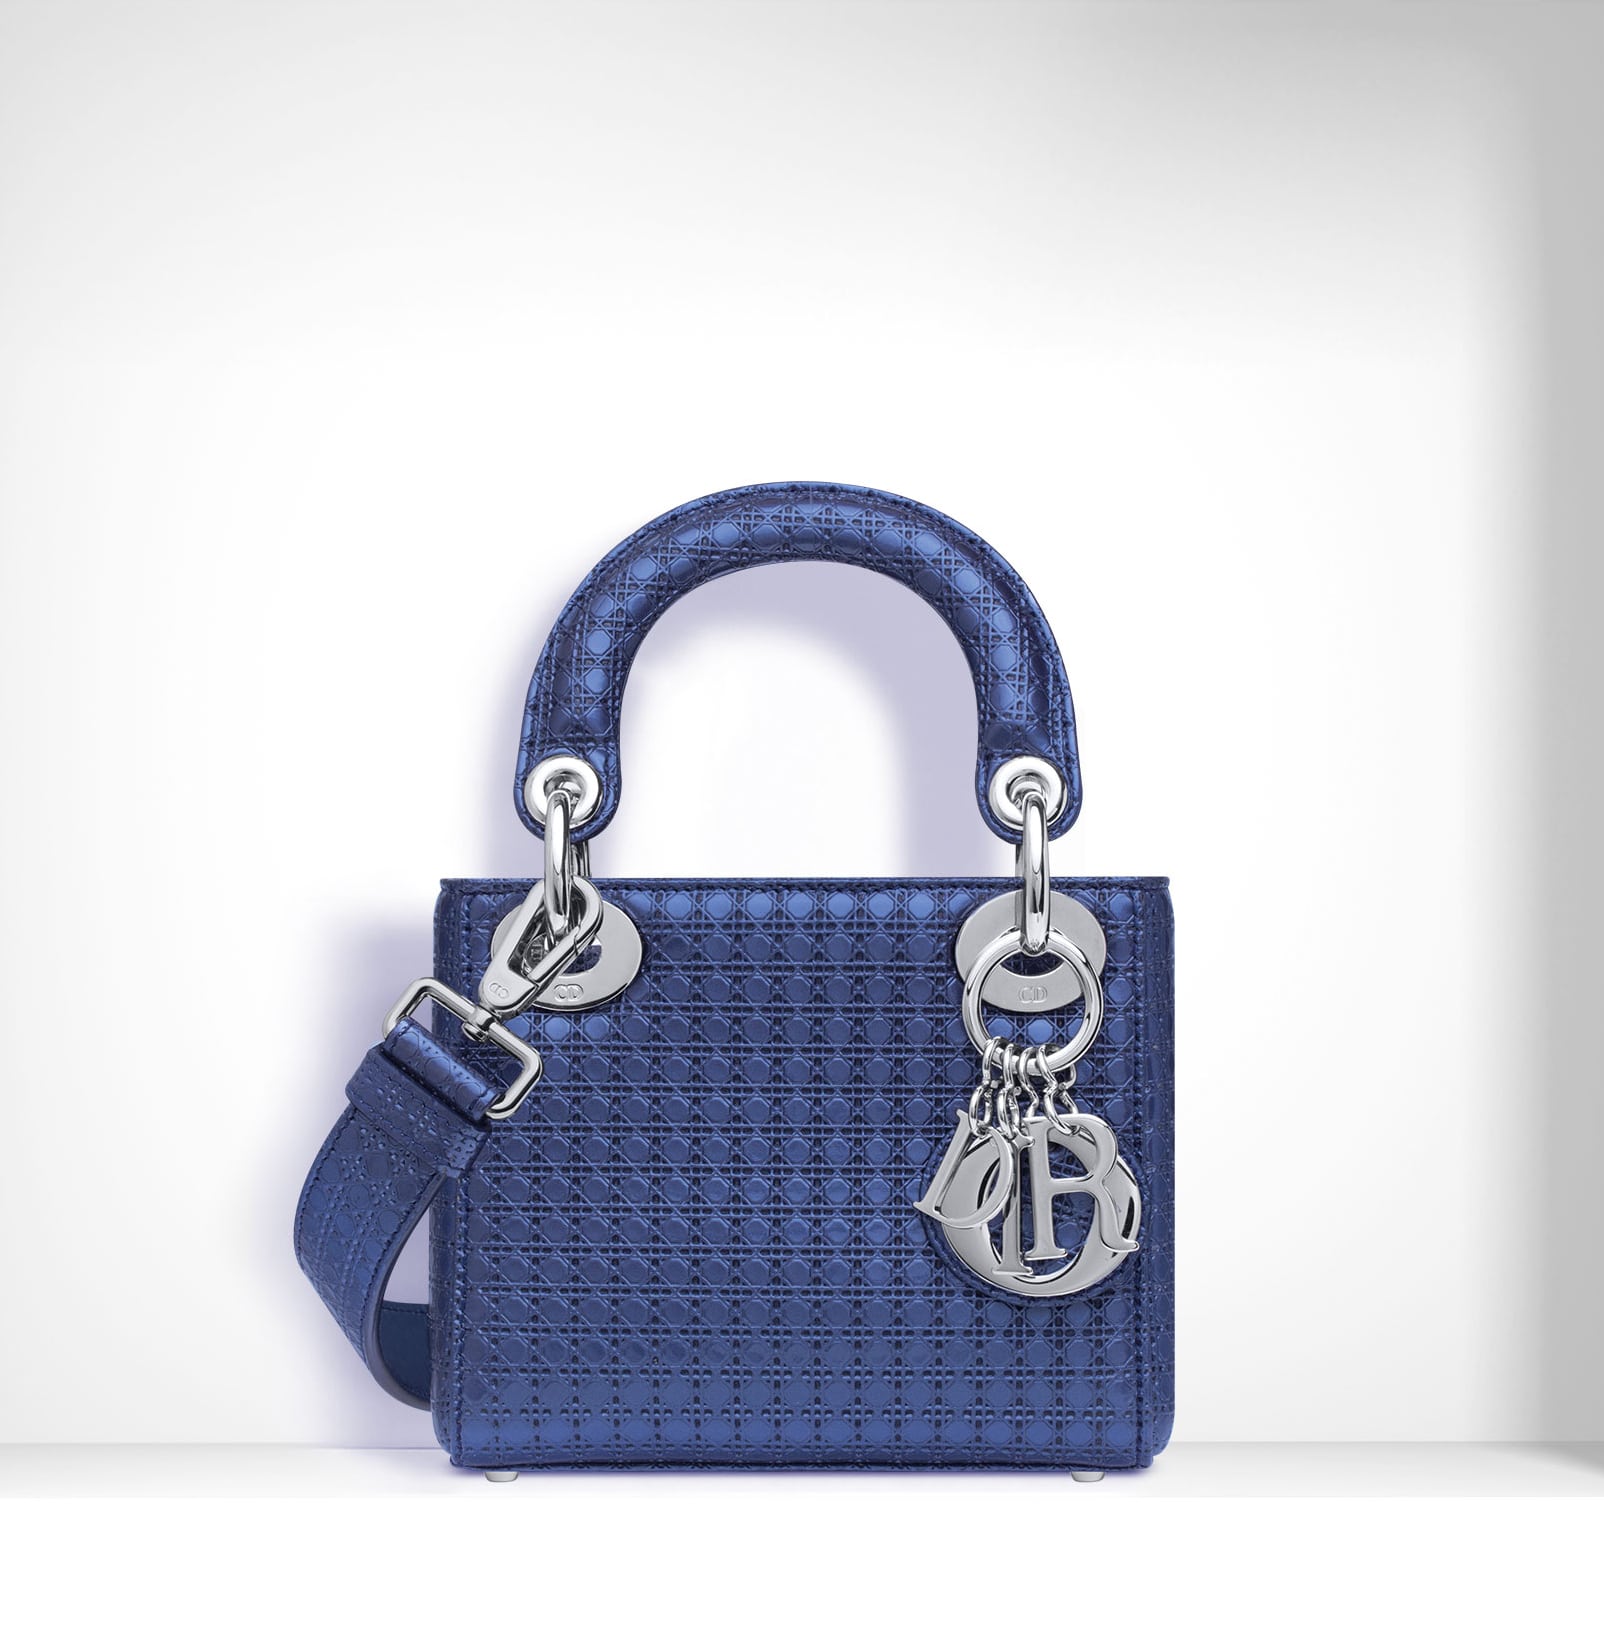 Lady Dior Bag Reference Guide - Spotted Fashion